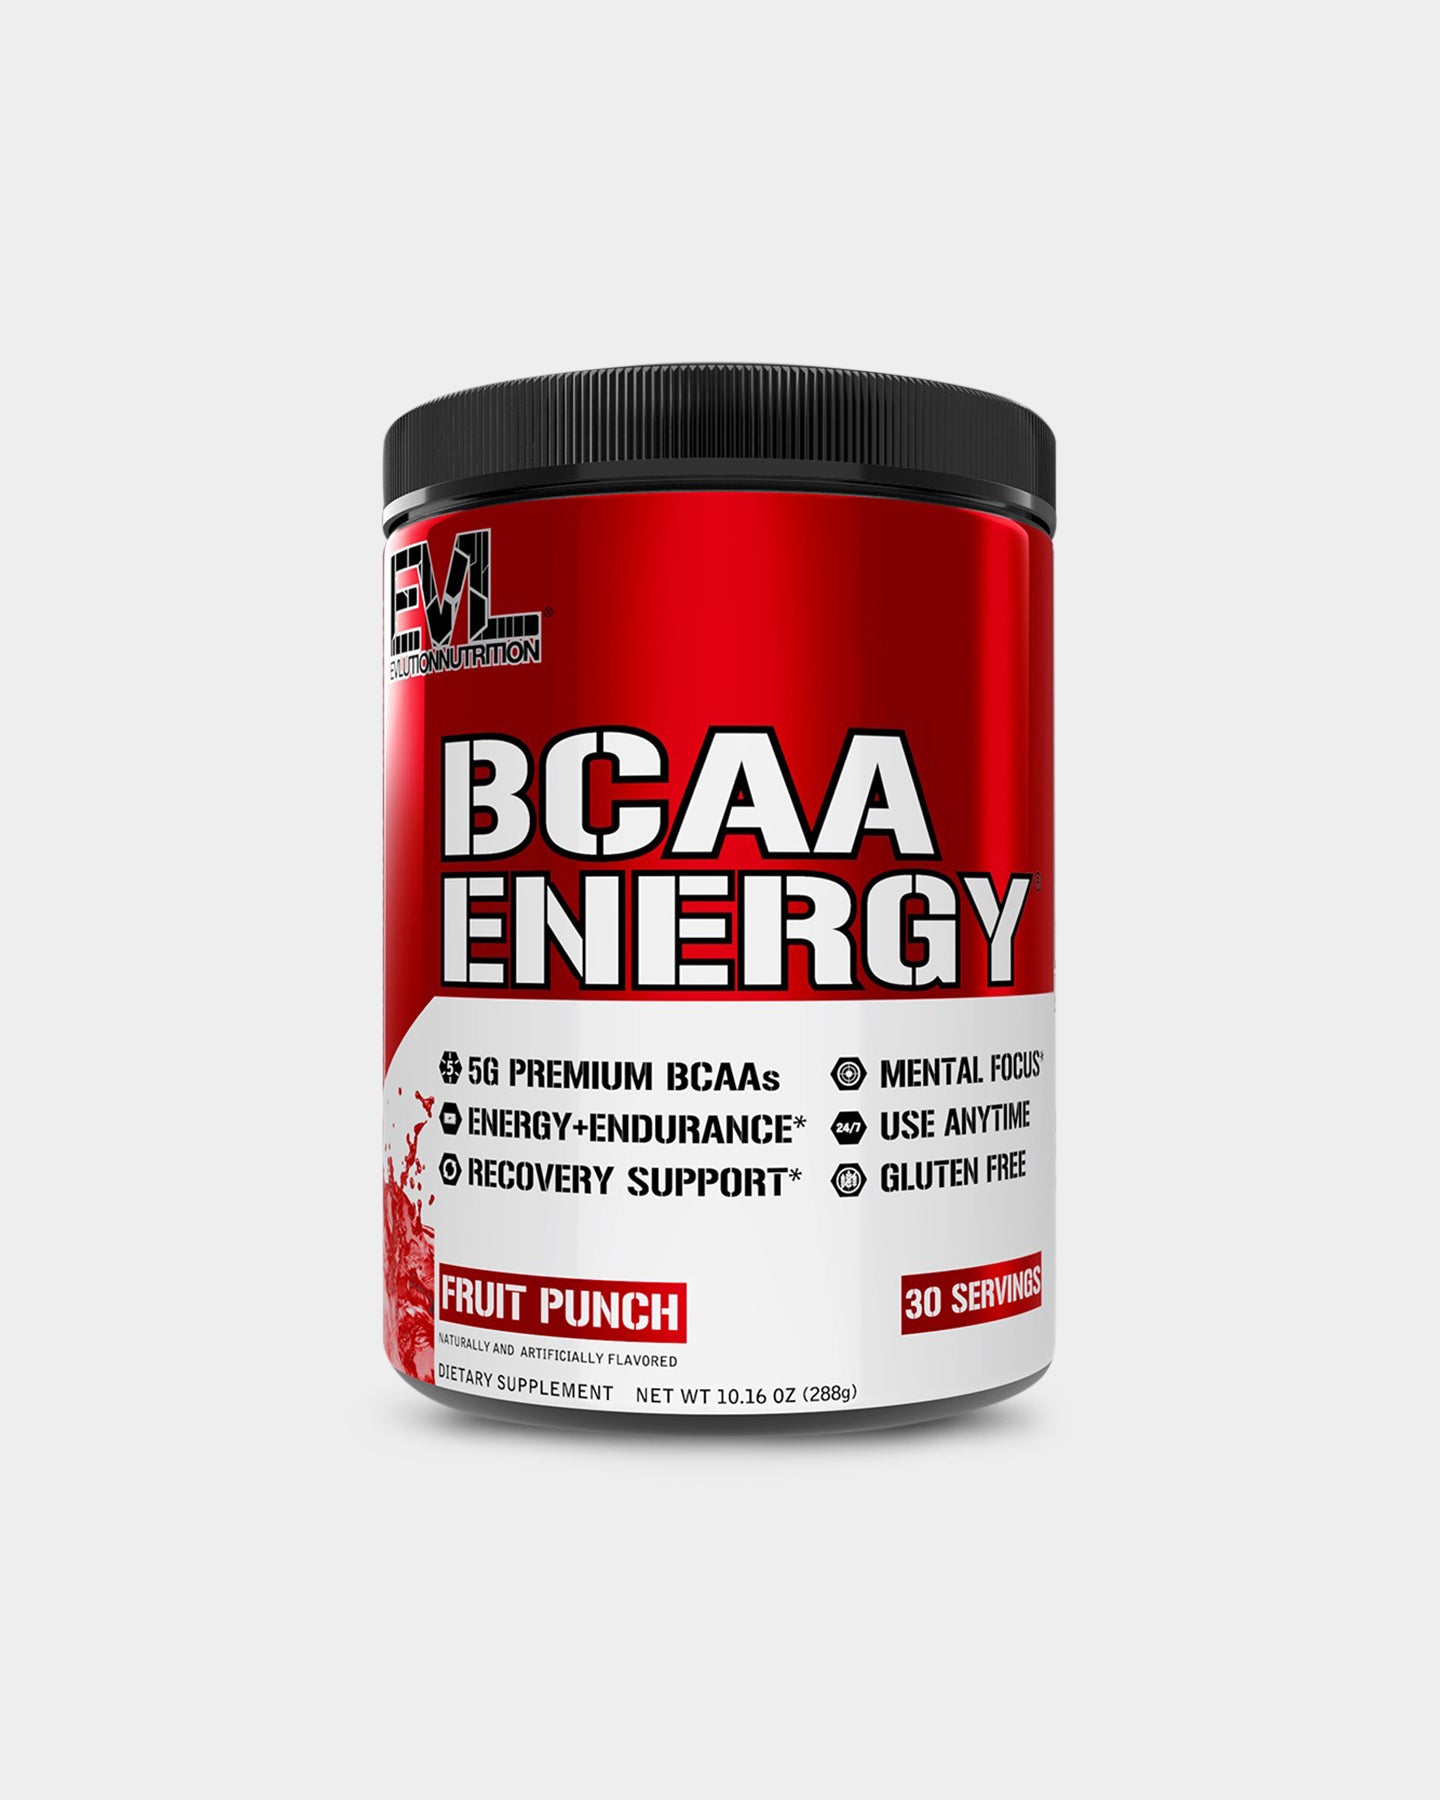 EVLUTION NUTRITION BCAA Energy Amino Acids, Fruit Punch, 30 Servings